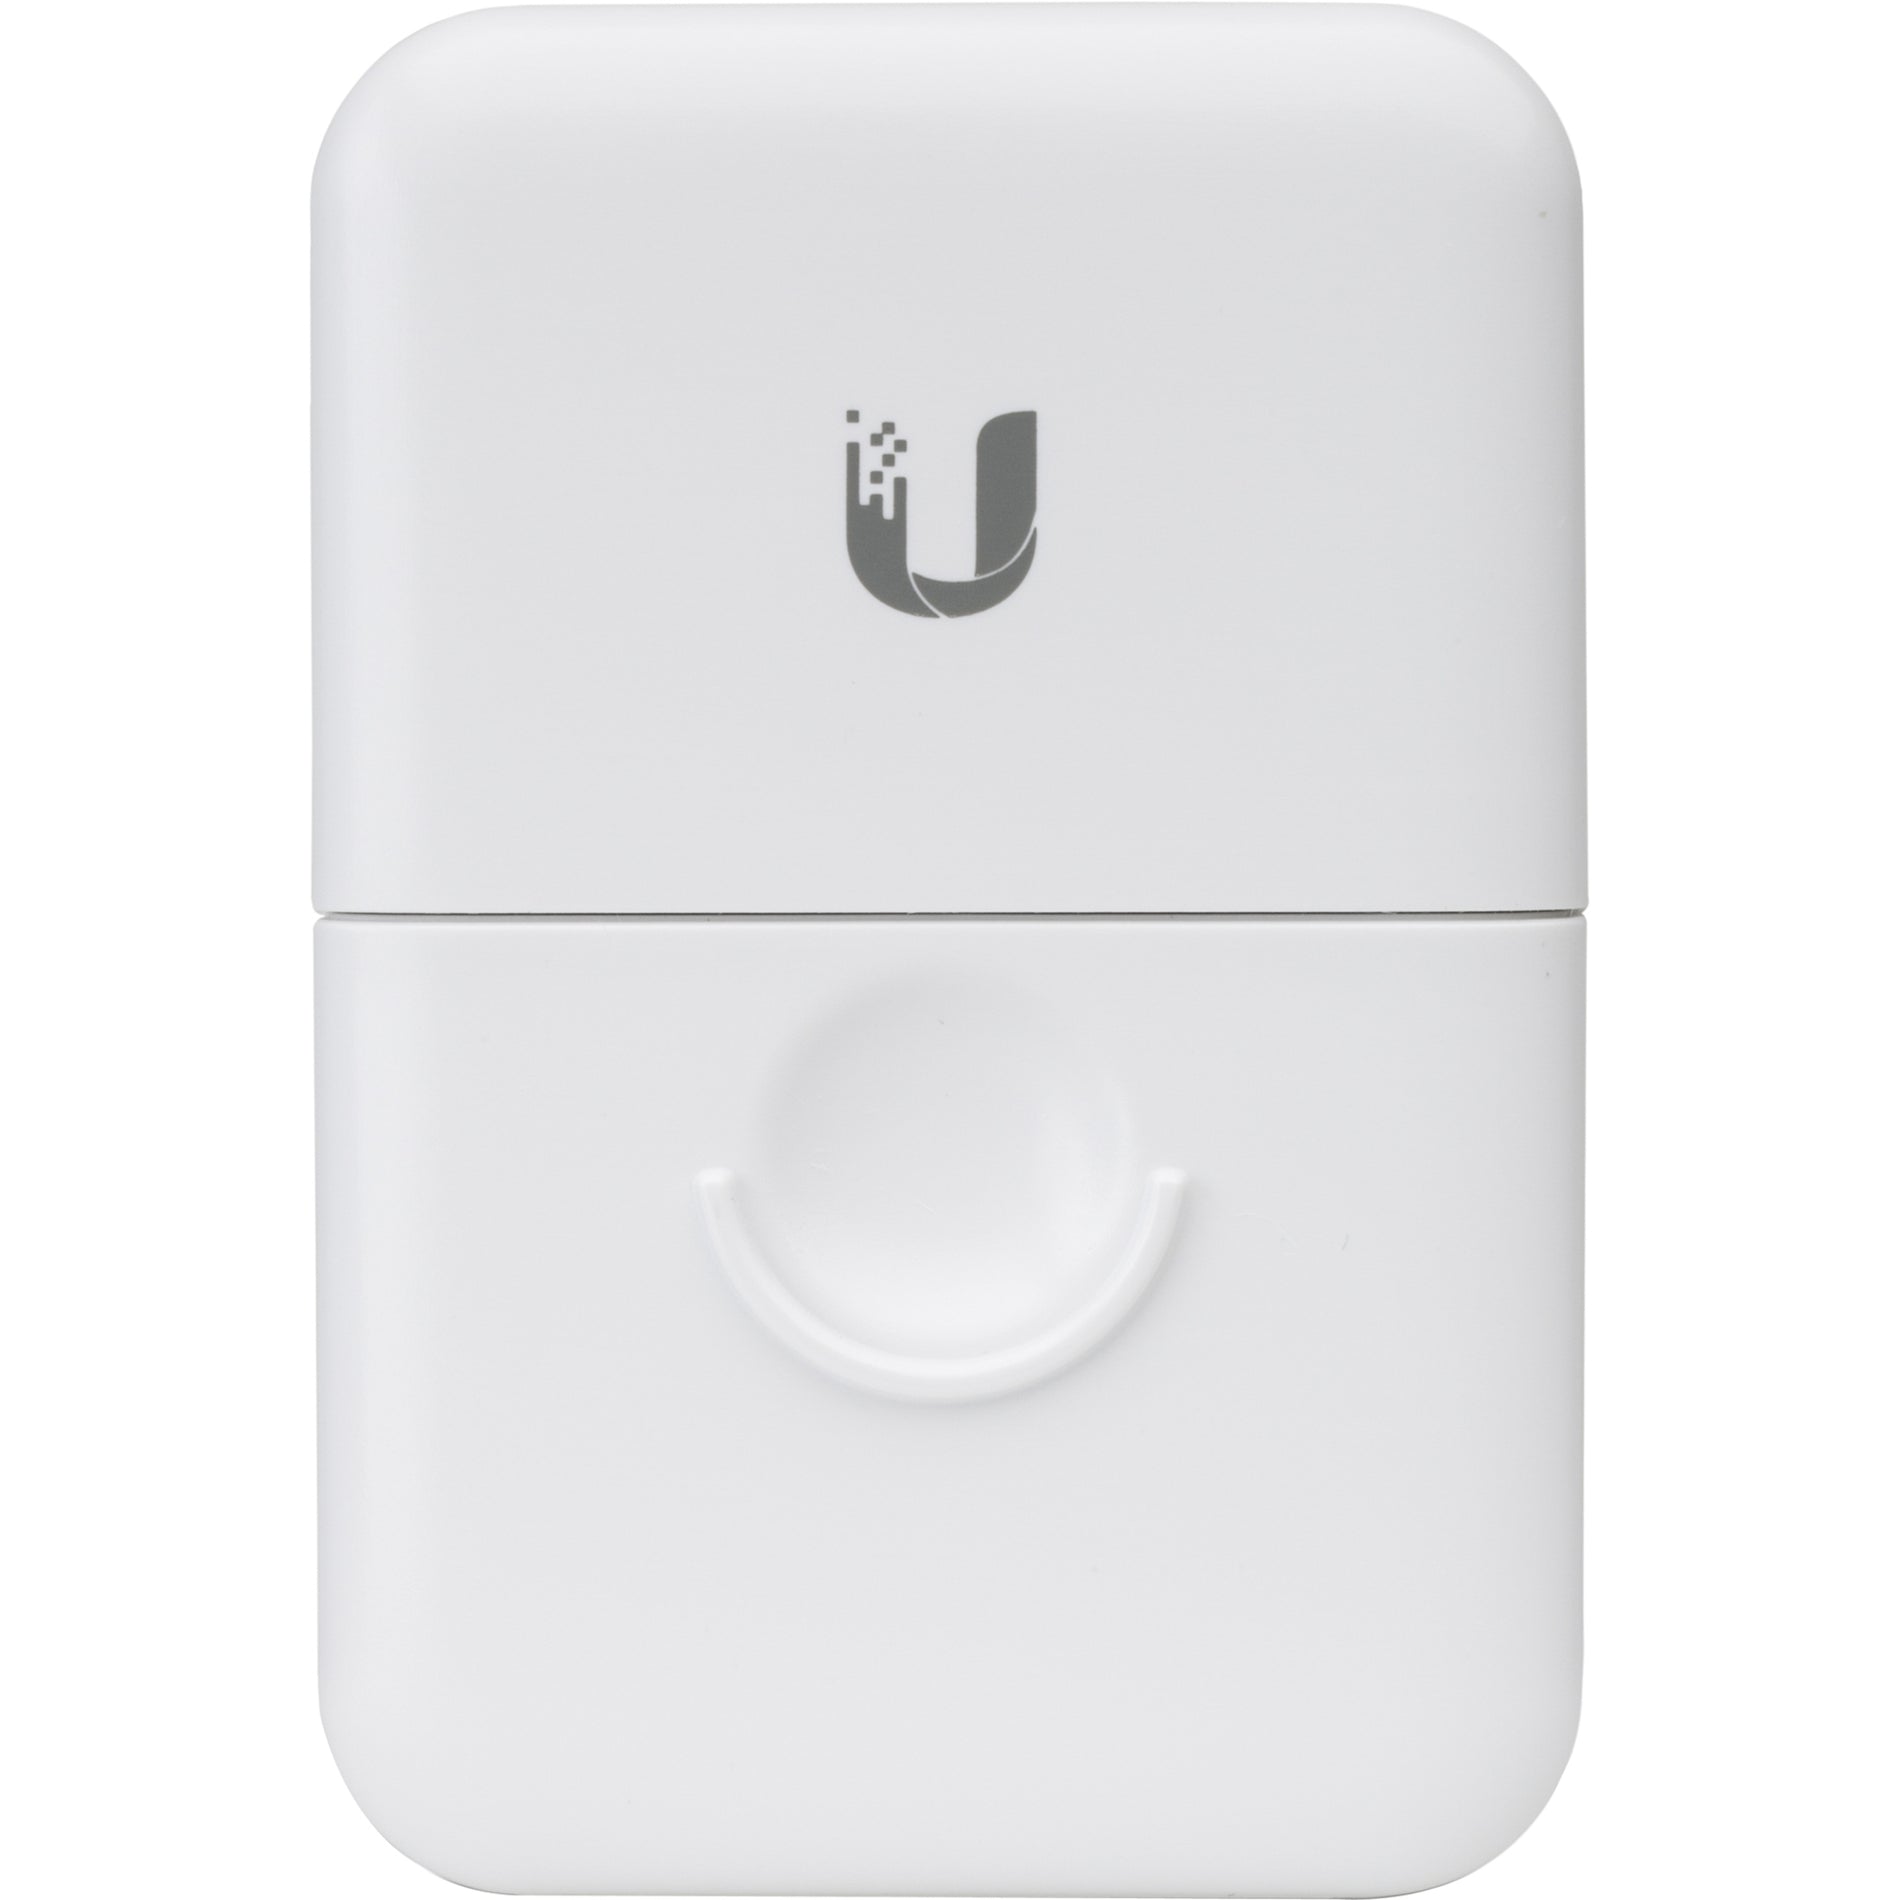 Ubiquiti ETH-SP-G2 Surge Suppressor/Protector - Protect Your Electronics from Power Surges